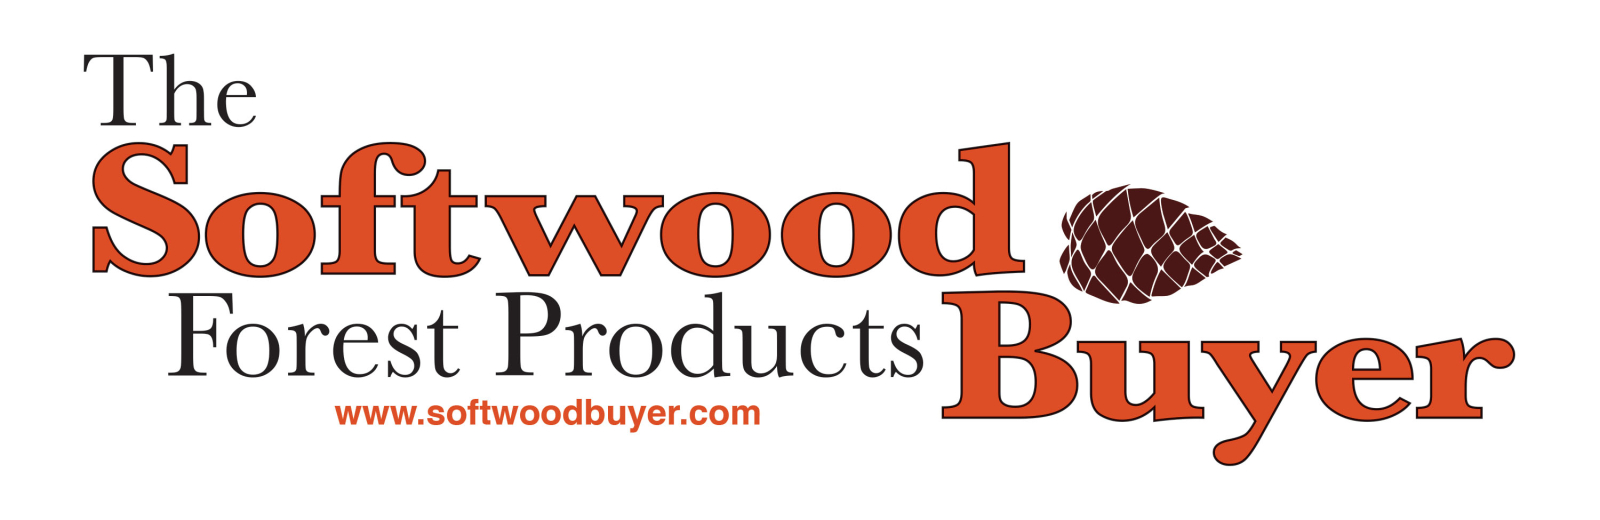 Softwood Forest Products Buyer